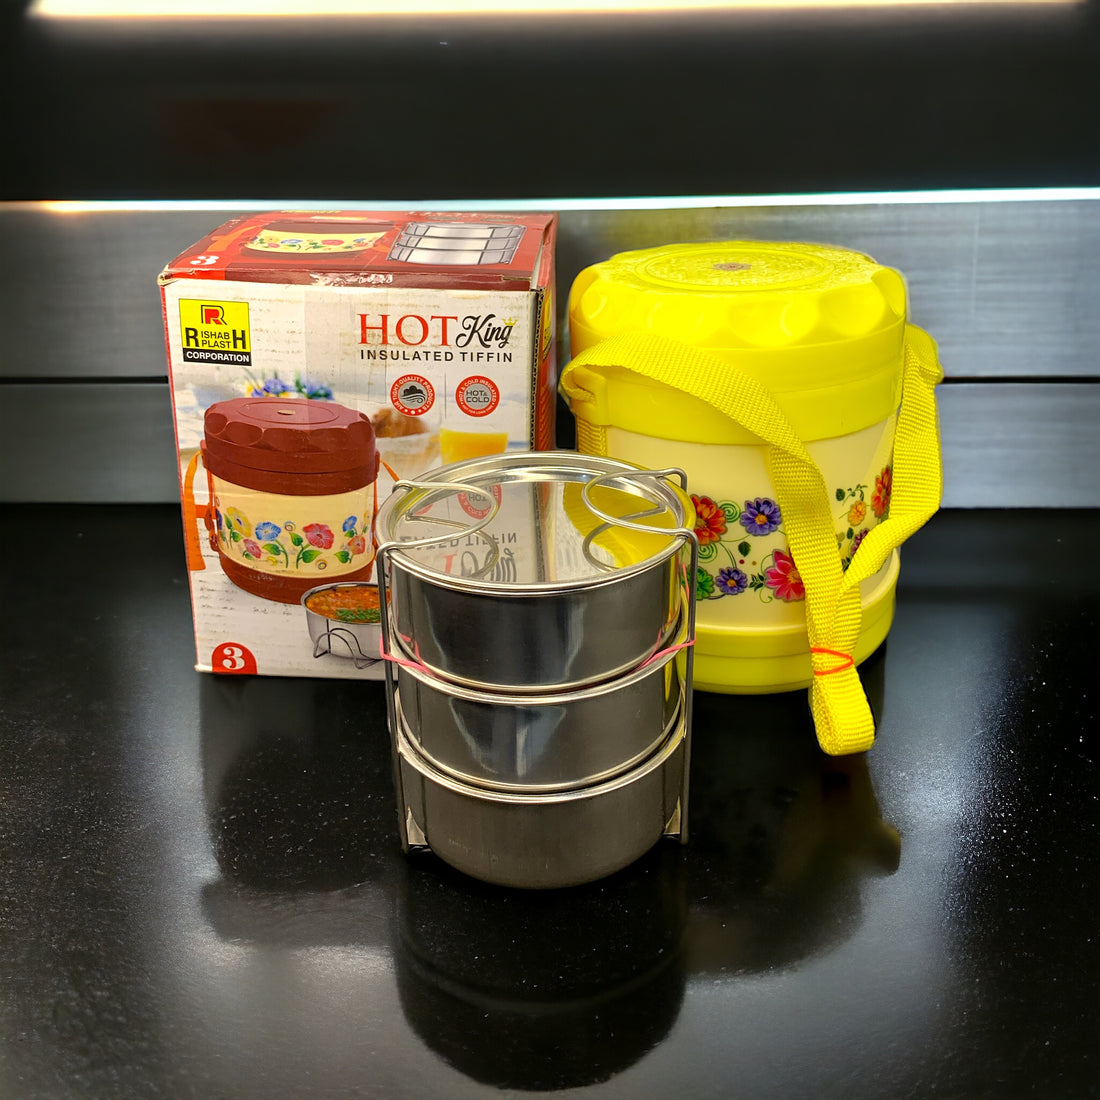 Hot King Insulated Stainless Steel Tiffin Box: 3 Layer